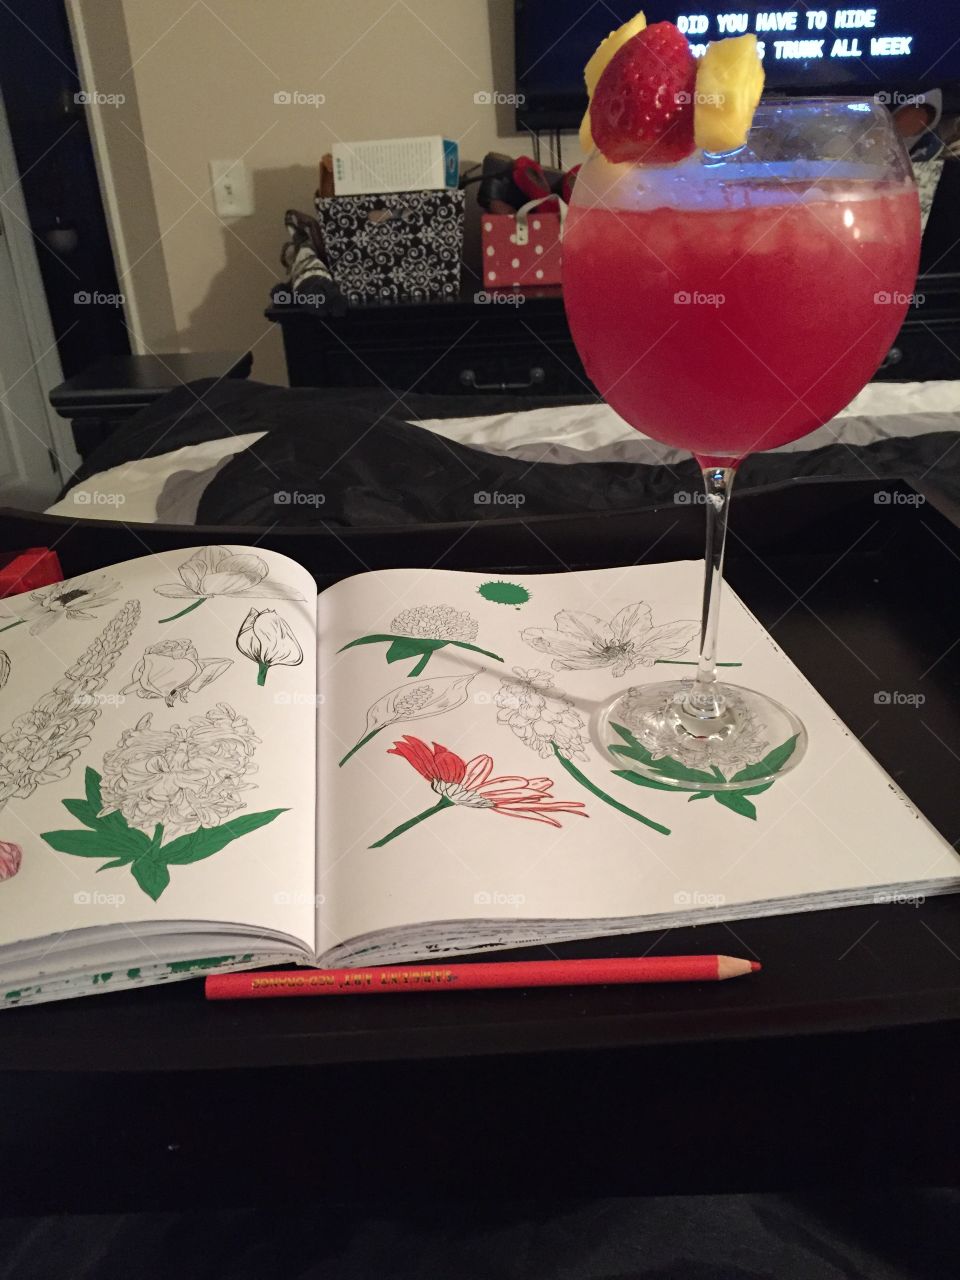 Daiquiri and coloring = perfect evening 